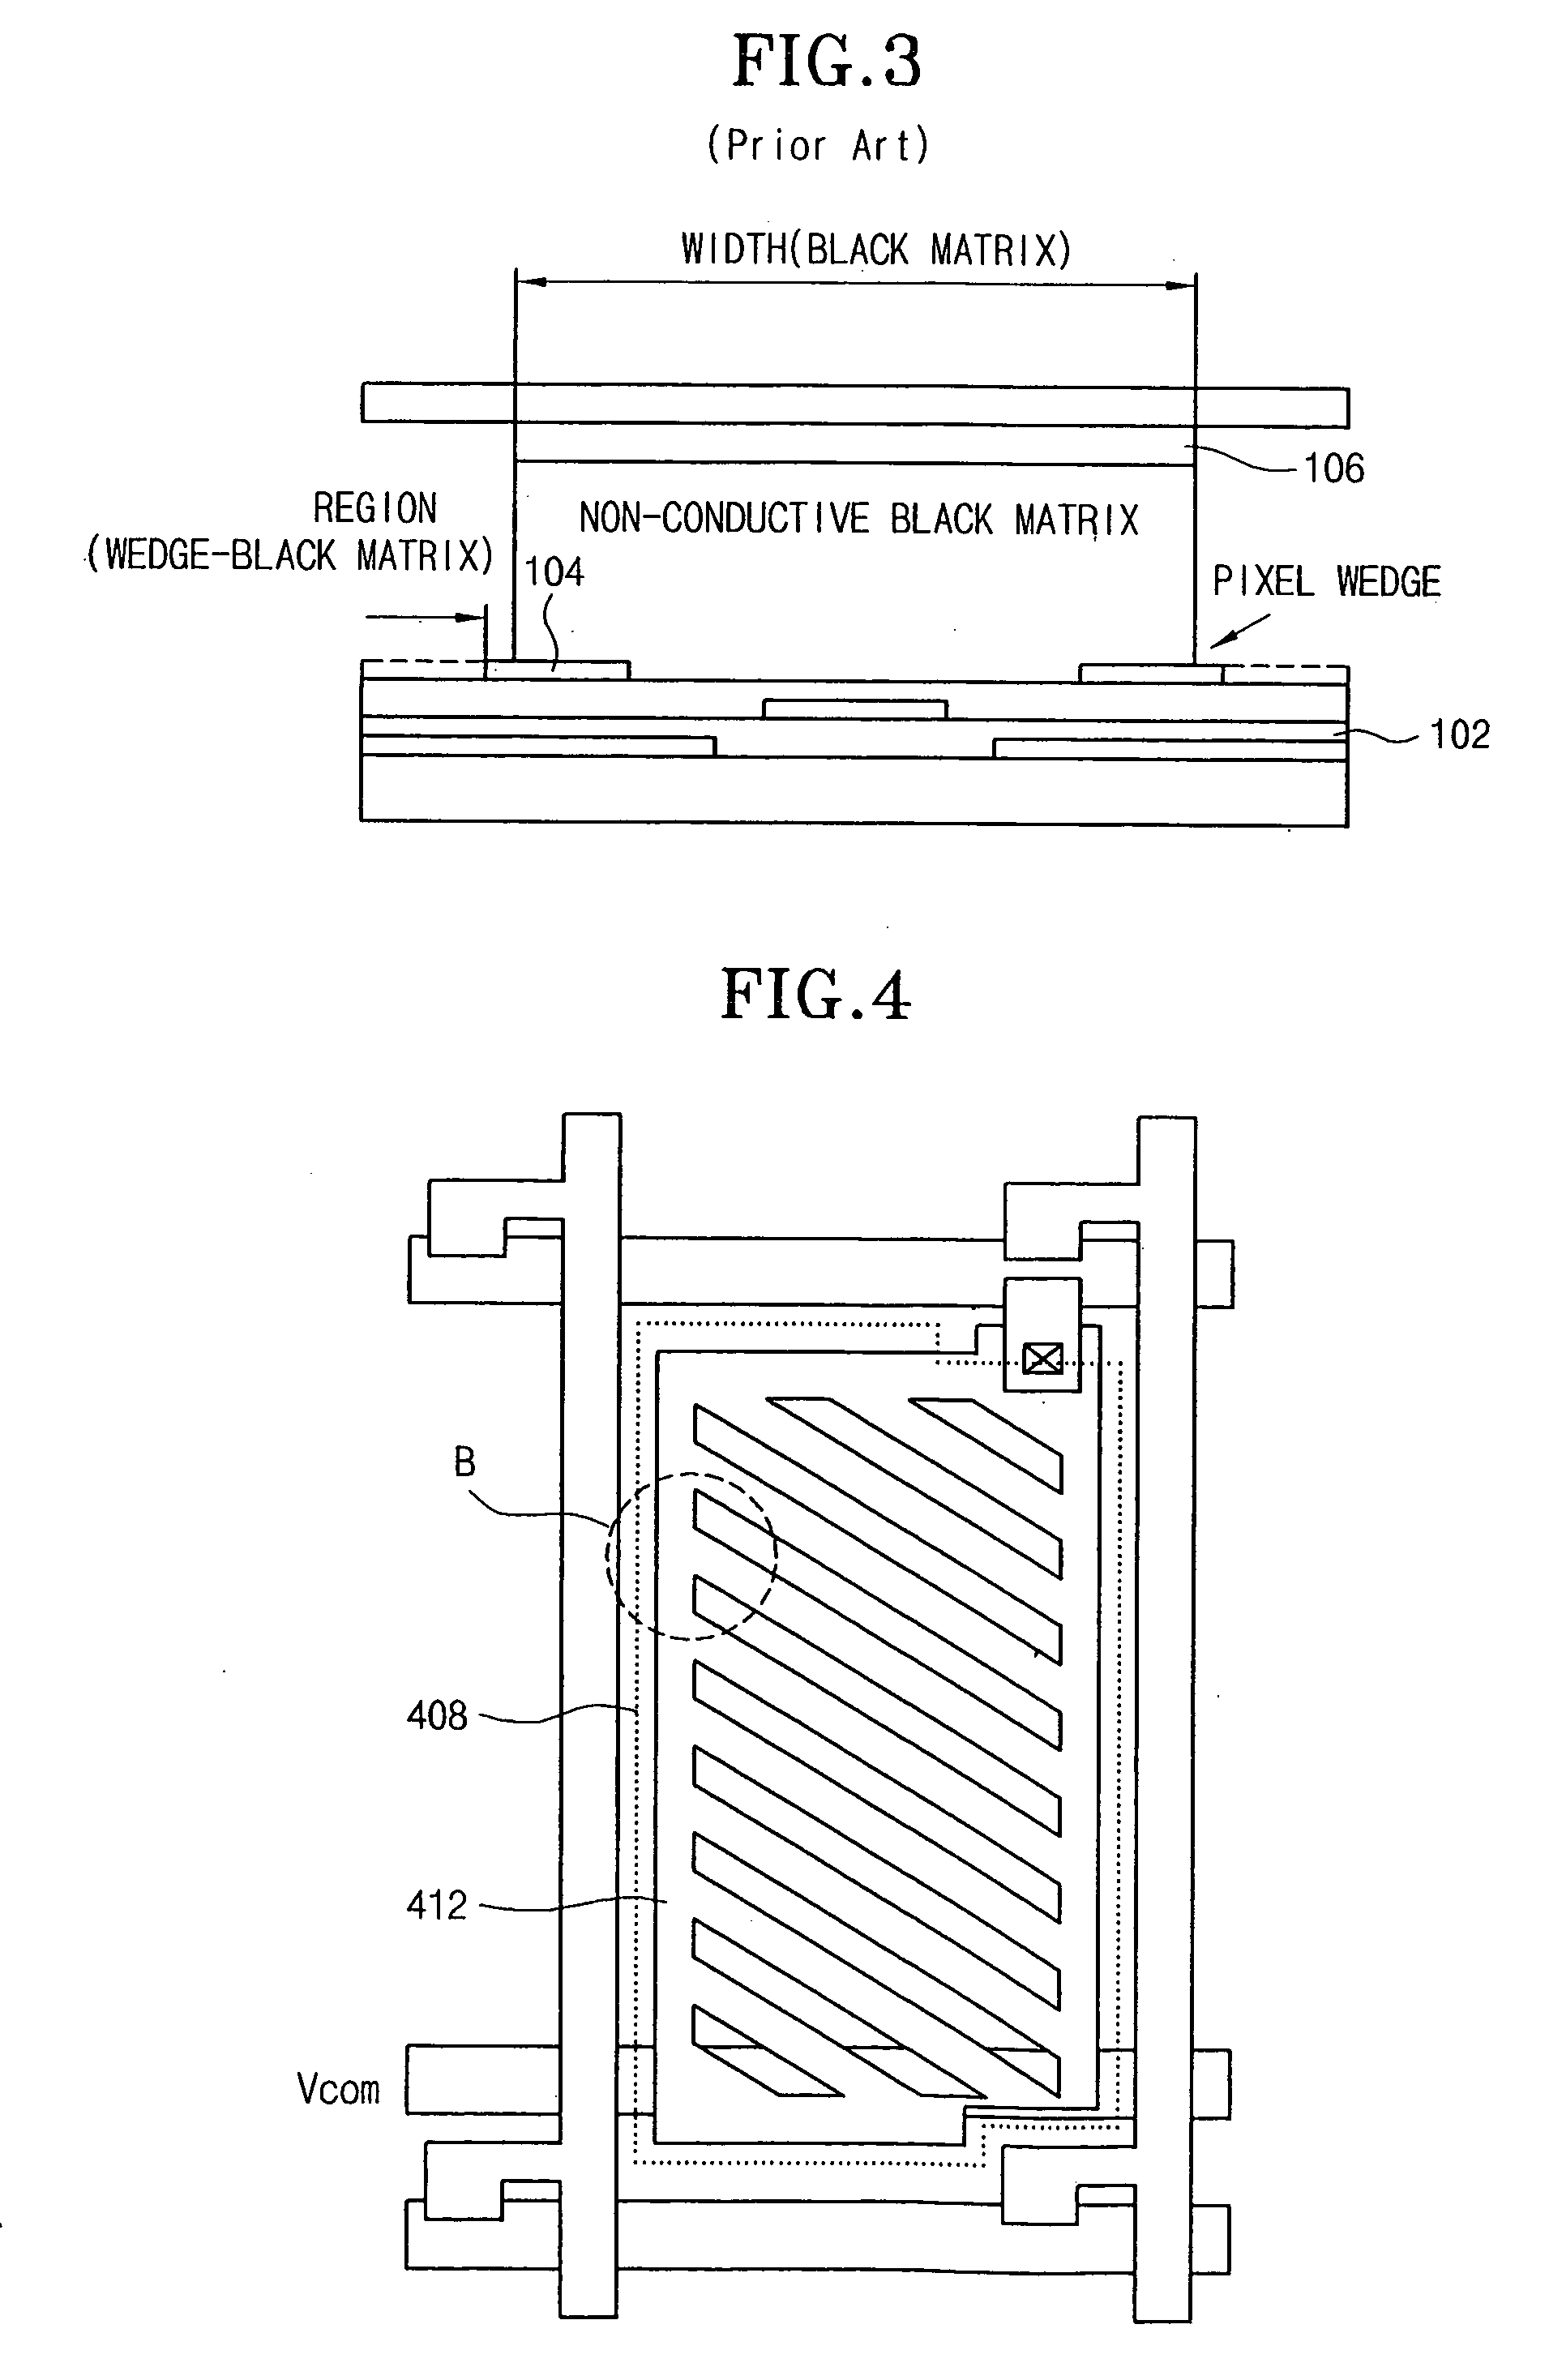 Fringe field switching liquid crystal display having sawtooth edges on the common and pixel electrodes and on the conductive black matrix